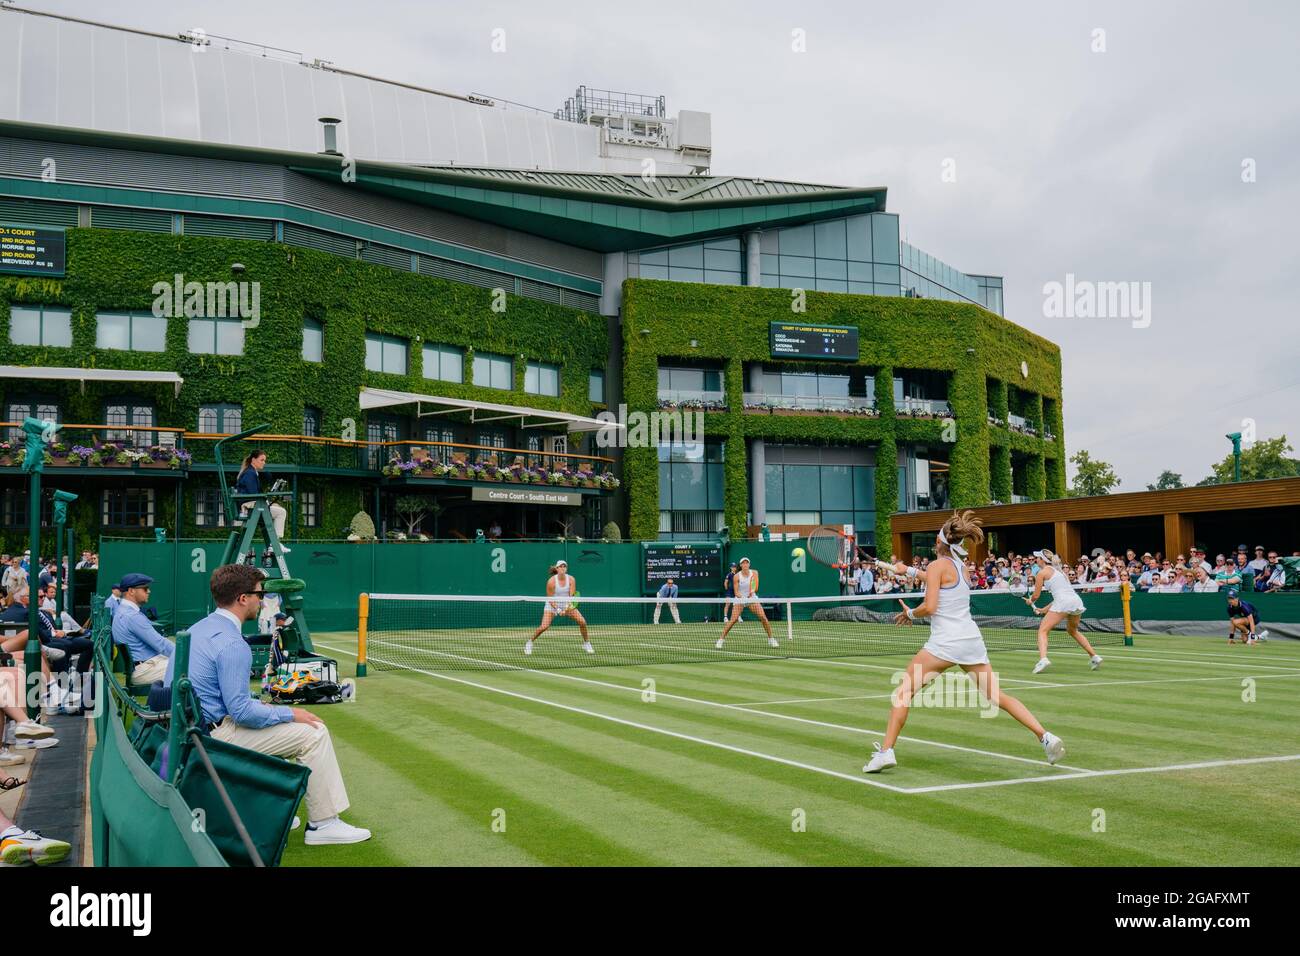 General views of A. Krunic and N. Stojanovic of Serbia takes on H. Carter of the USA and L. Stefani of Brazil at Wimbledon with Centre Court behind Stock Photo